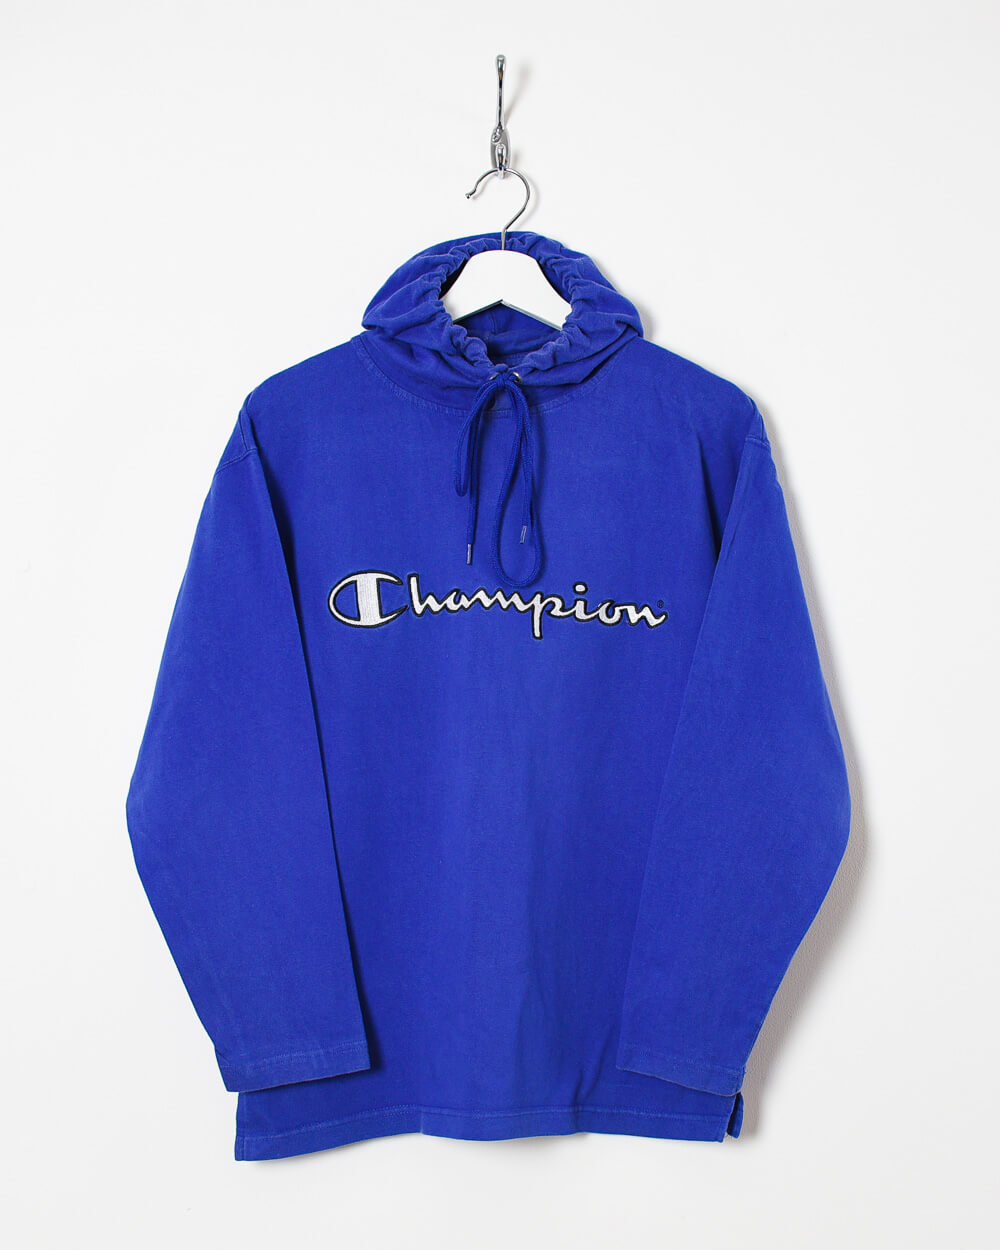 Champion Long Sleeved Hooded T-Shirt - Small - Domno Vintage 90s, 80s, 00s Retro and Vintage Clothing 